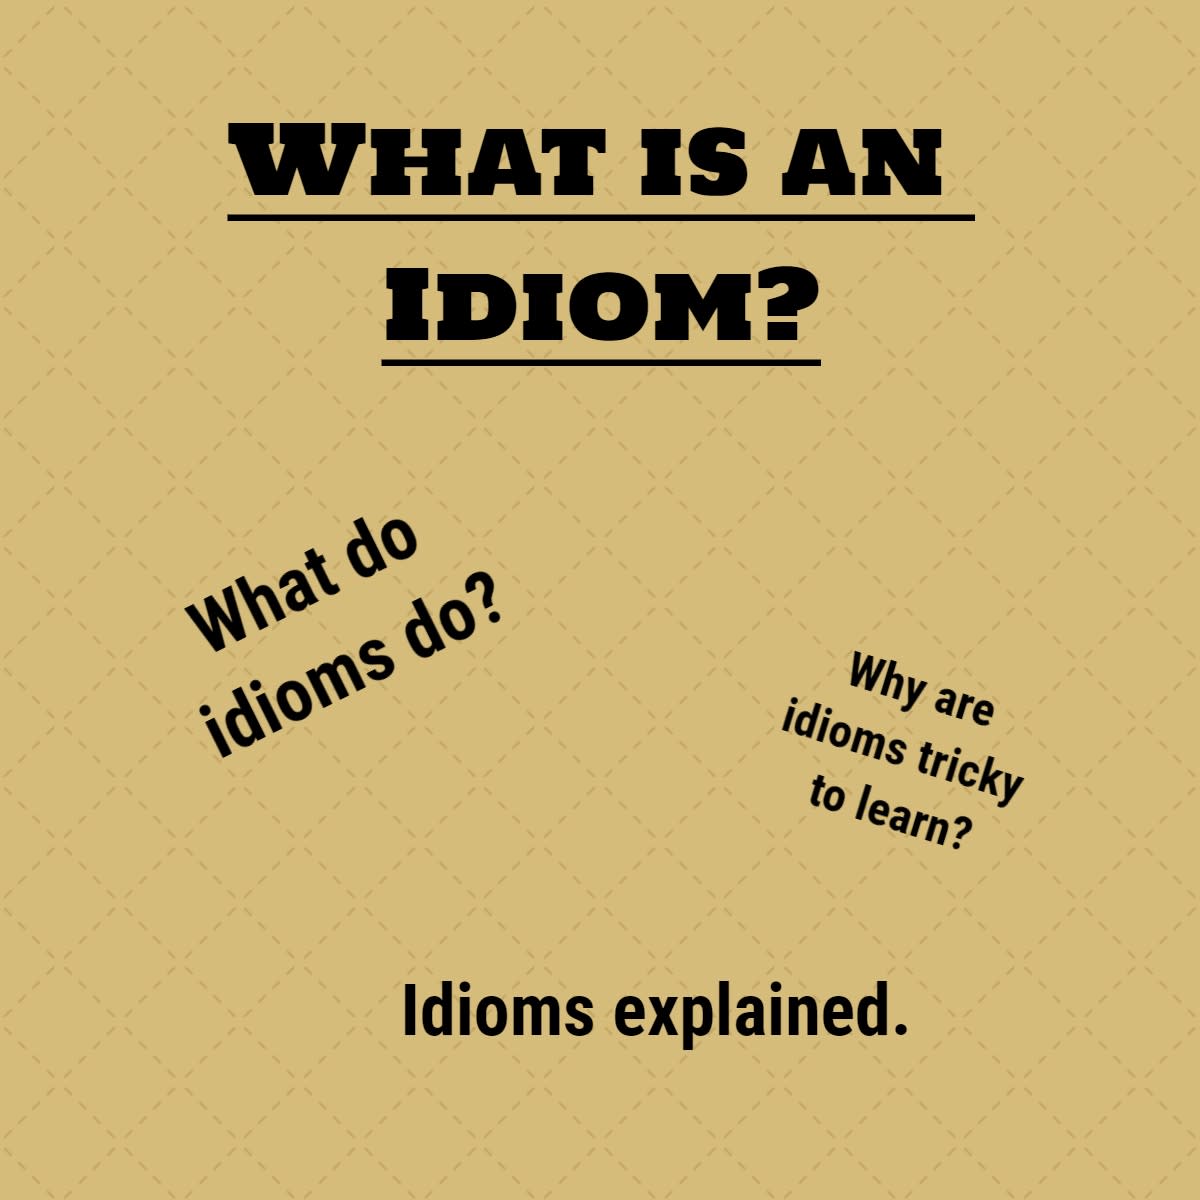 What is an Idiom?